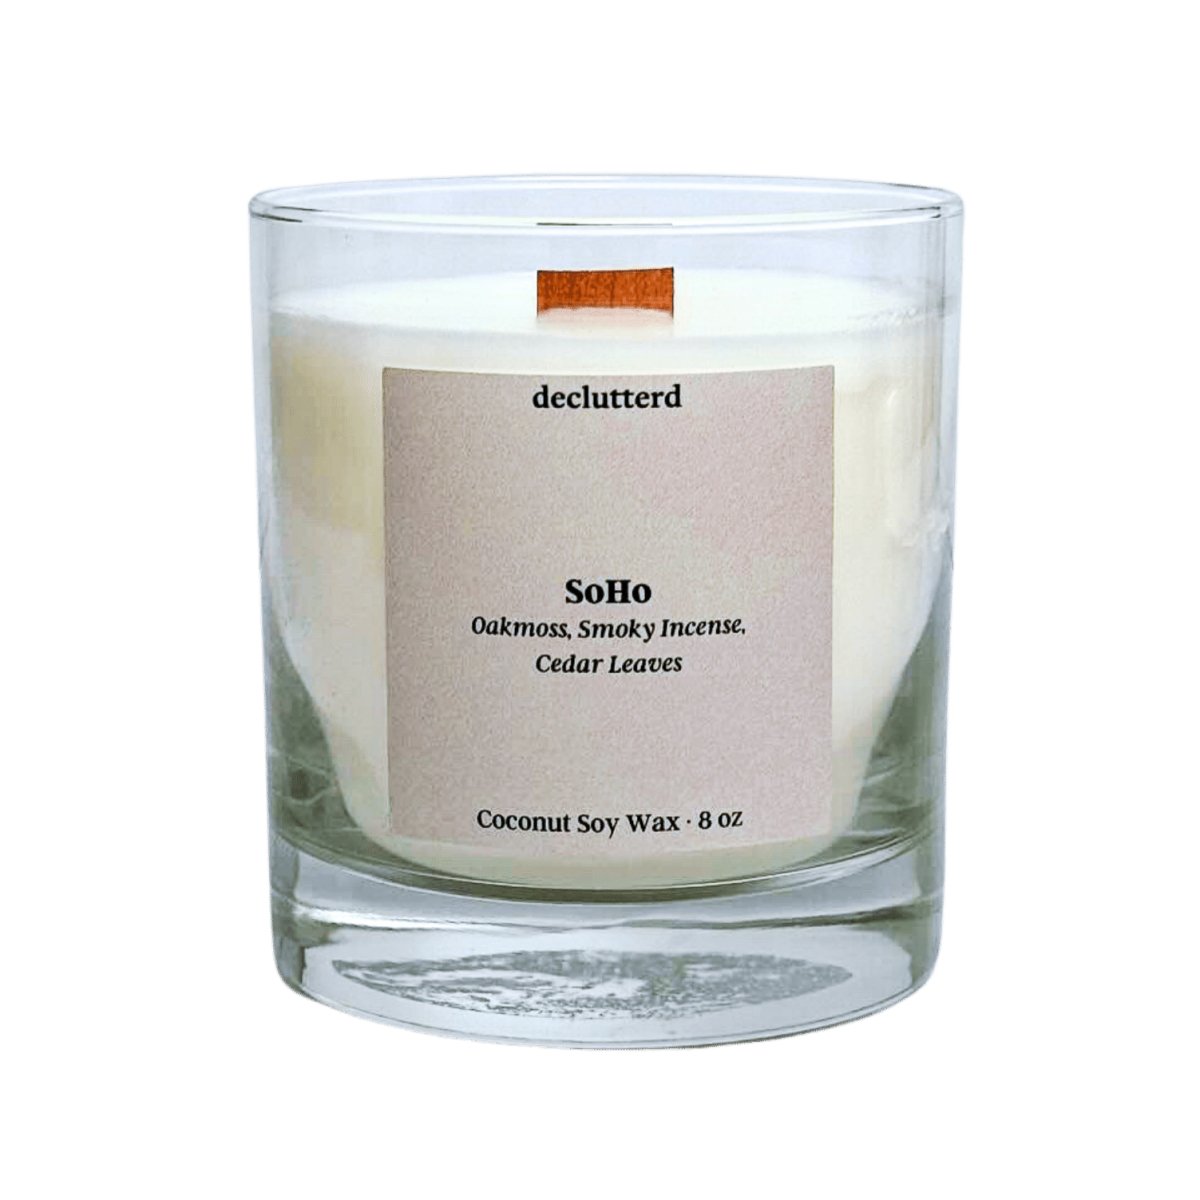 declutterd SoHo Wood Wick Candle - lily & onyx